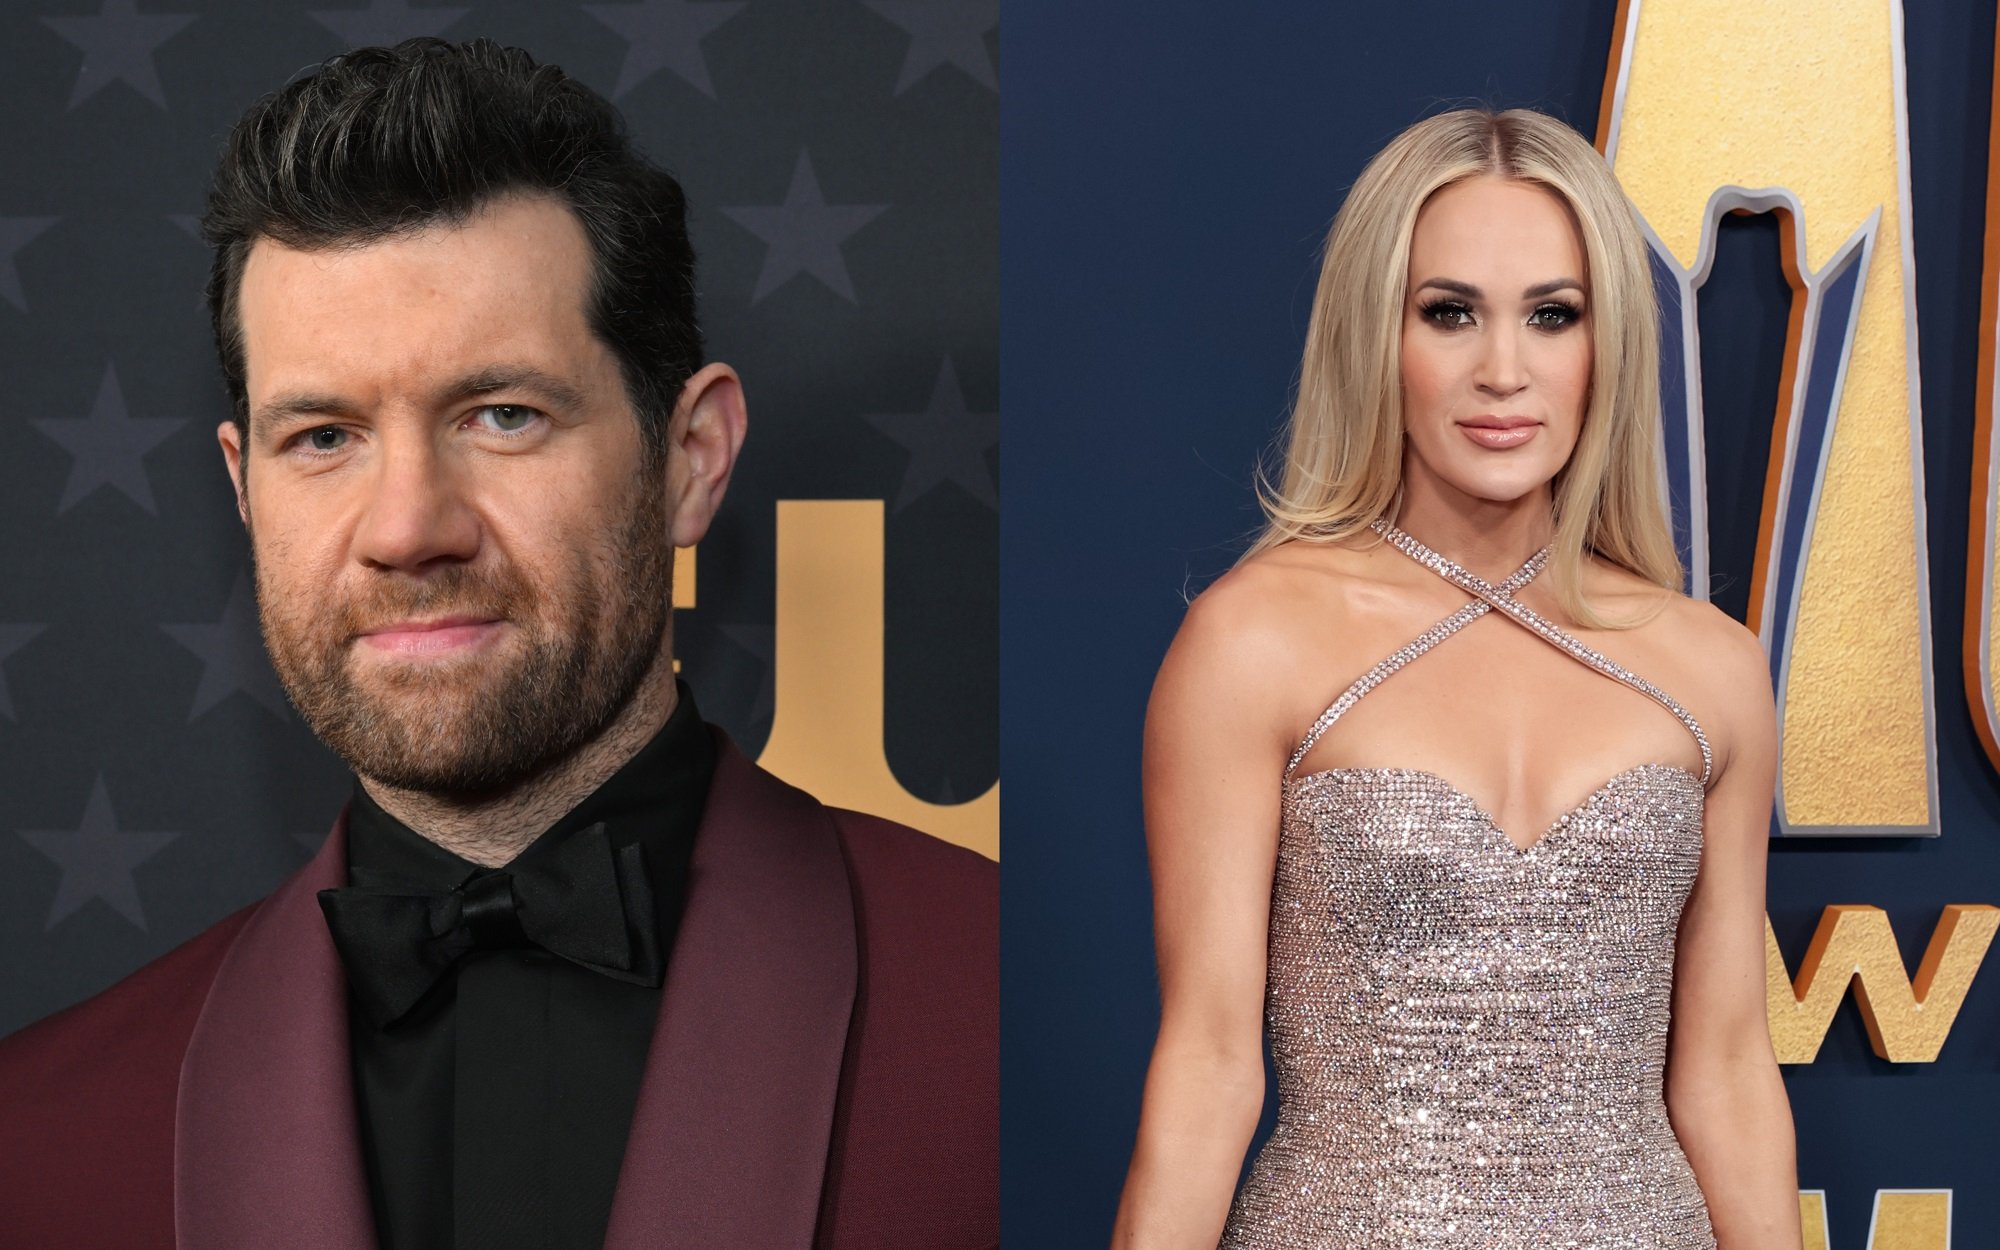 A joined photo of Billy Eichner and Carrie Underwood